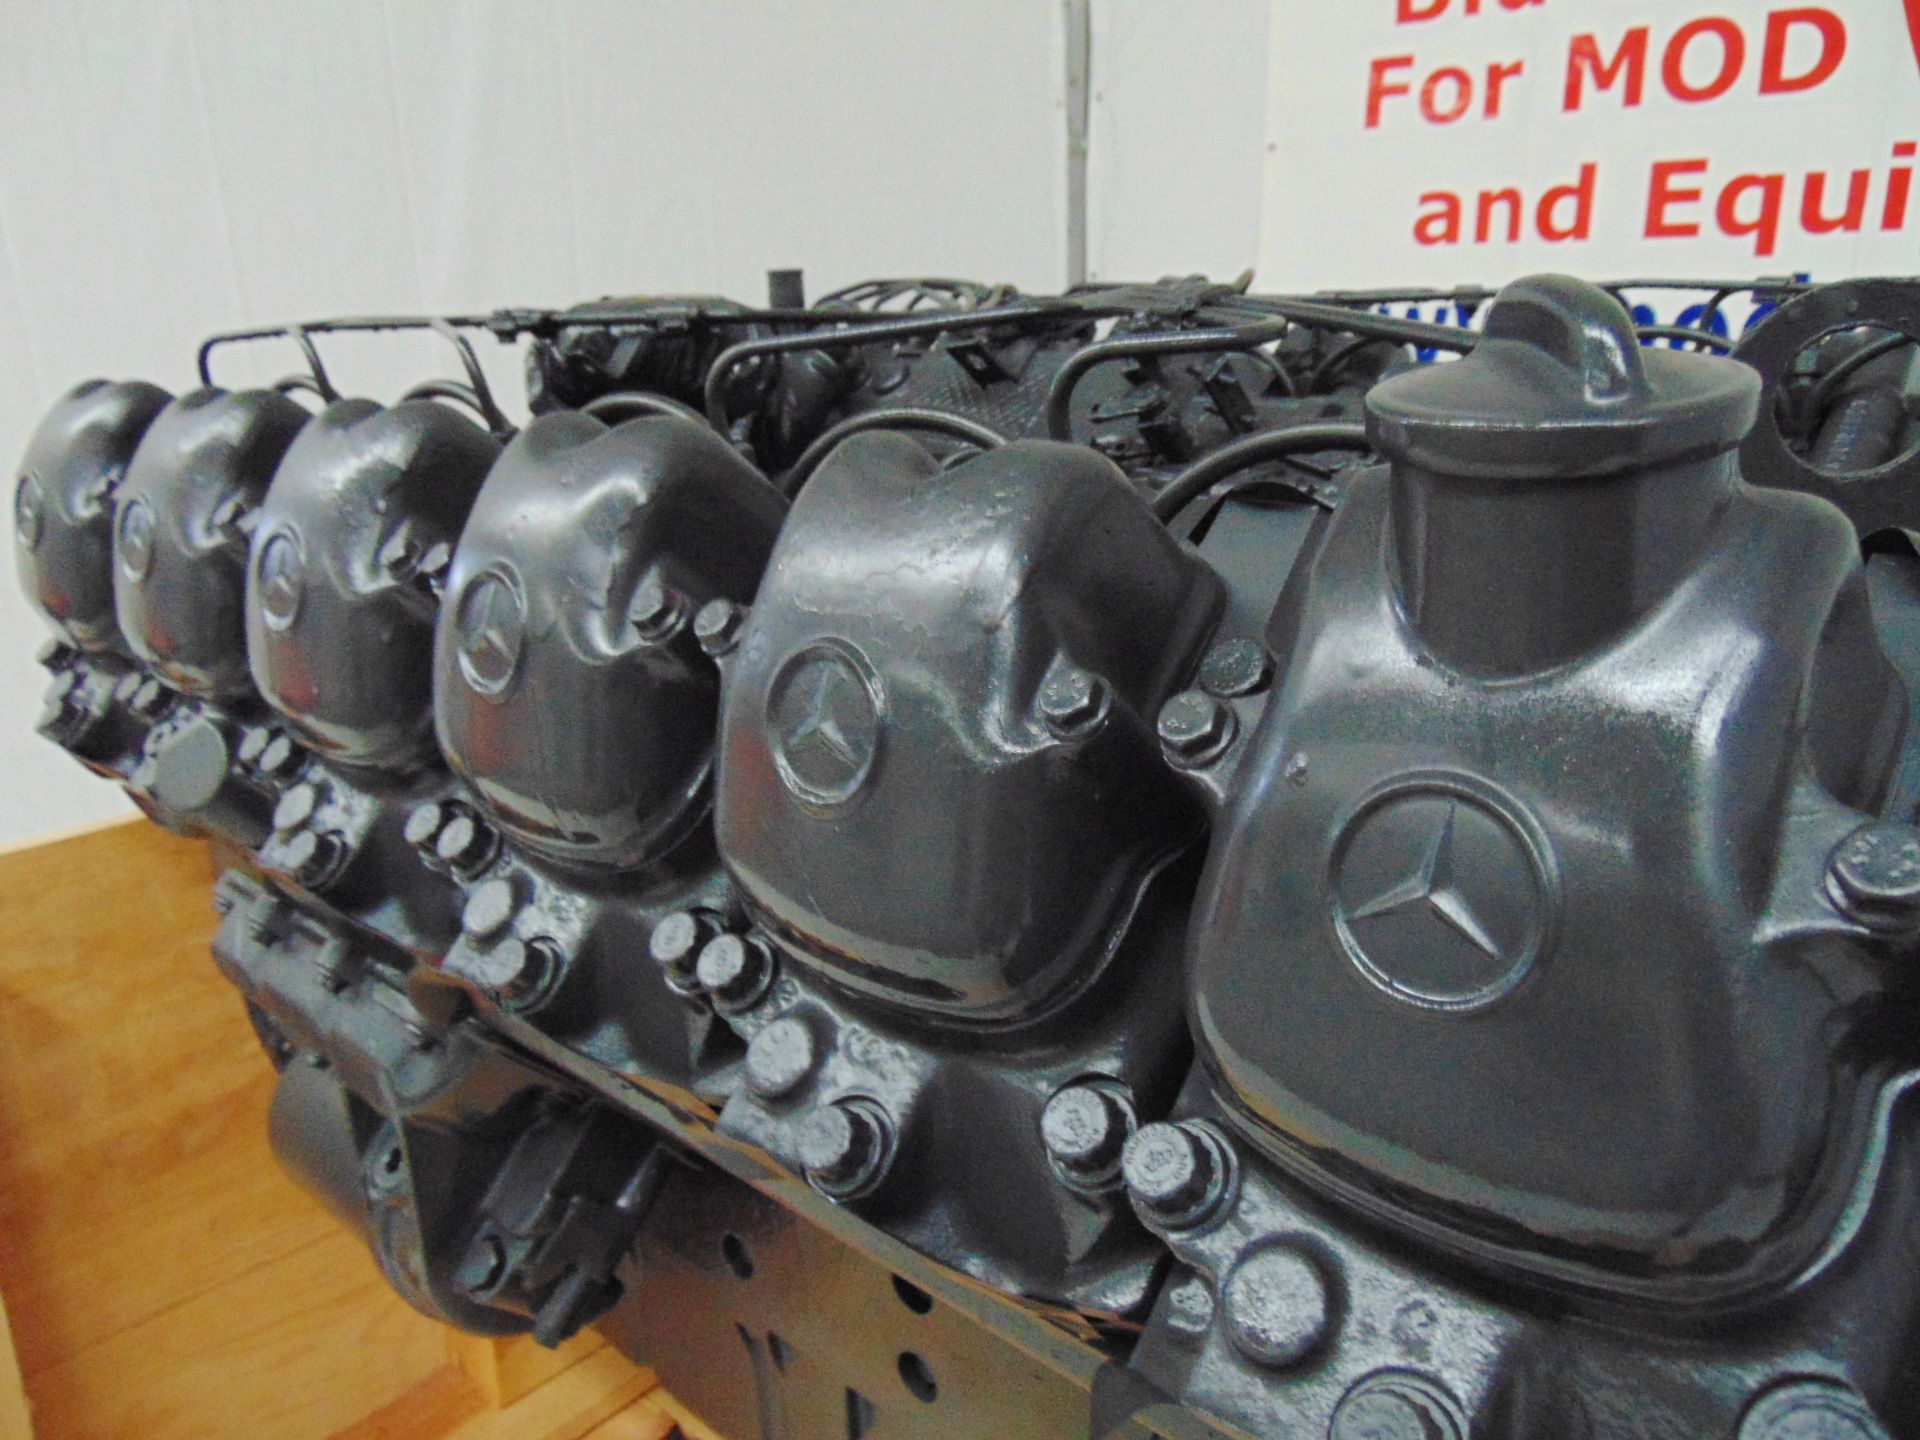 Factory Reconditioned Mercedes-Benz OM424 V12 Turbo Diesel Engine - Image 3 of 34